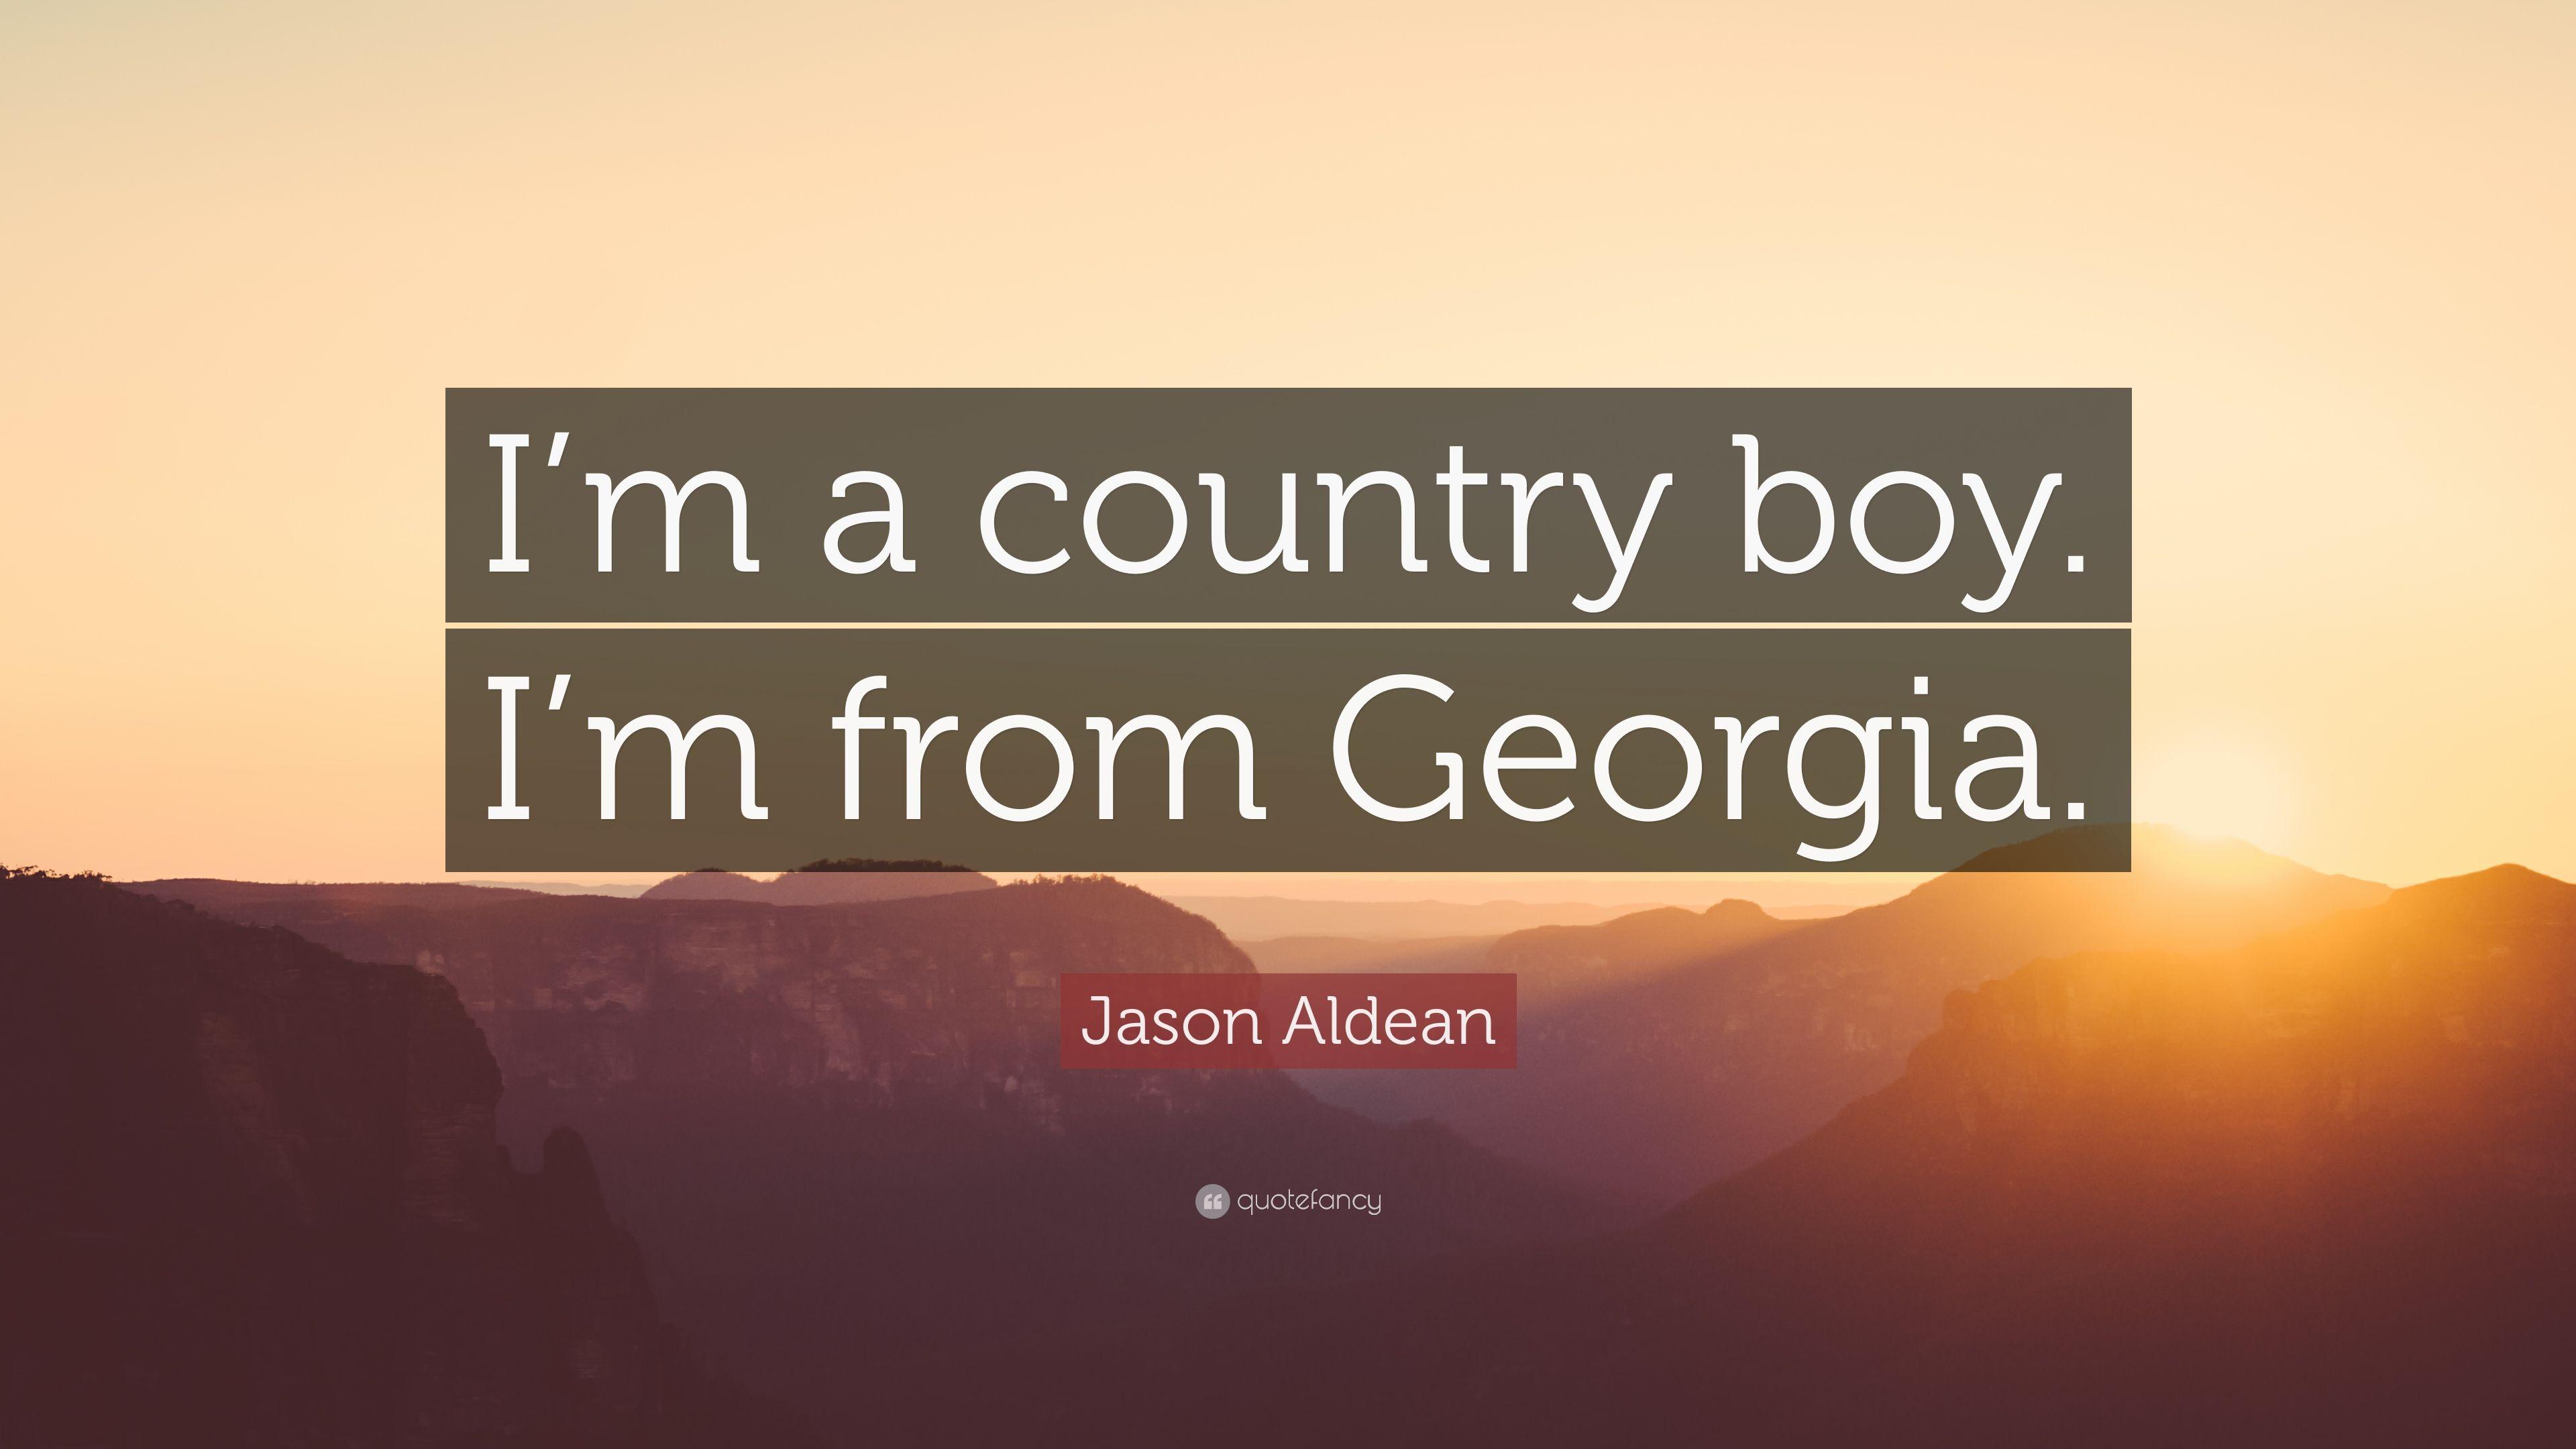 Jason Aldean Quote: “I'm a country boy. I'm from Georgia.” 7